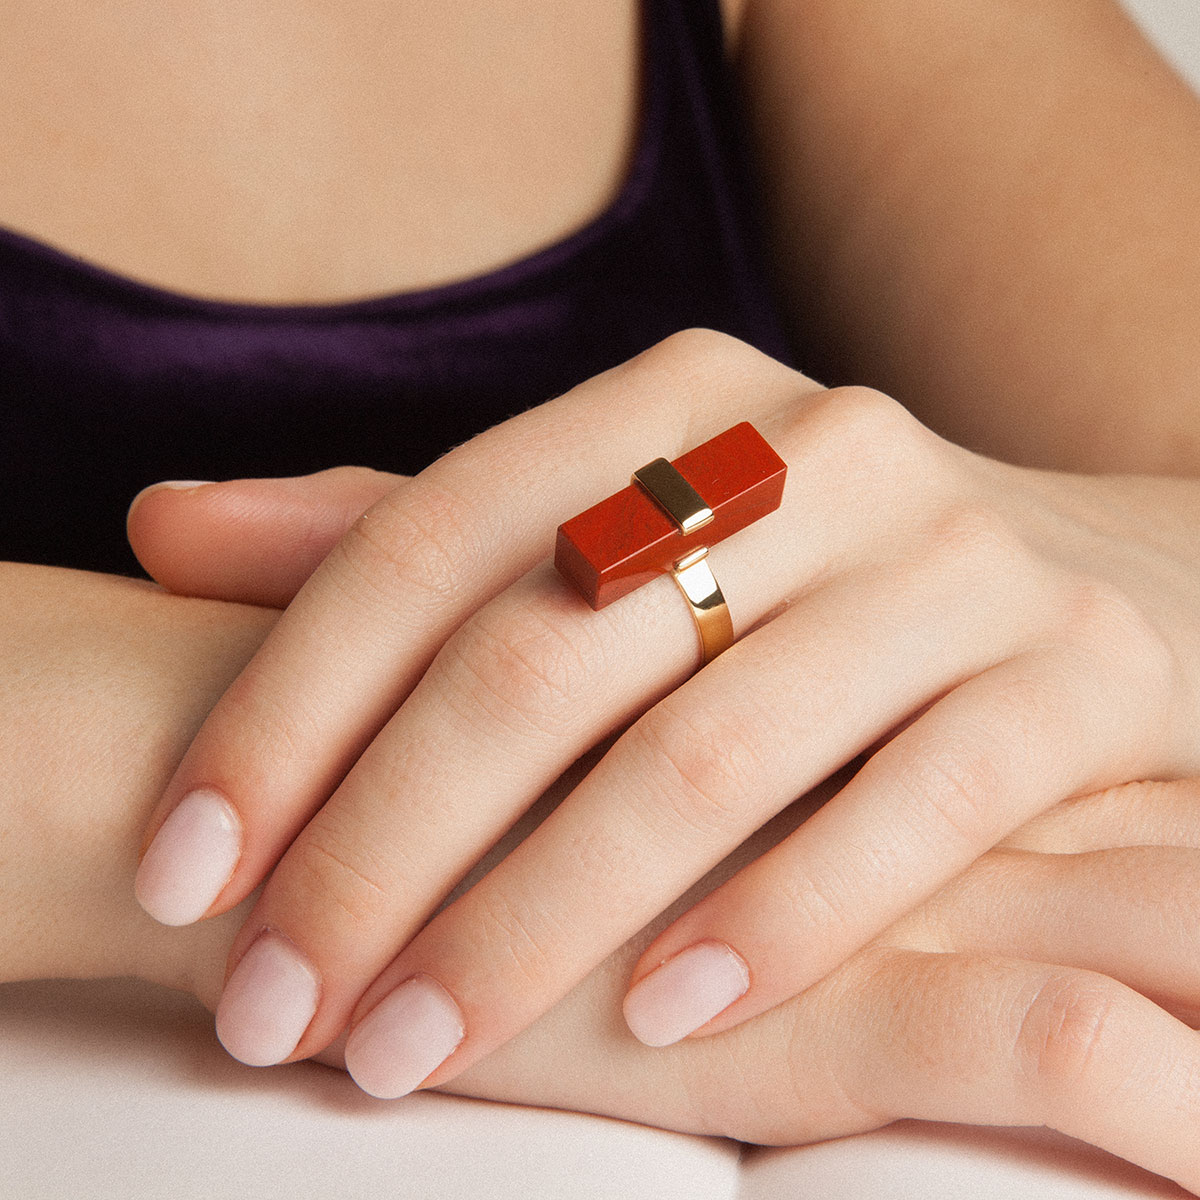 Axy handcrafted ring in 9k or 18k gold and red jasper designed by Belen Bajo m1